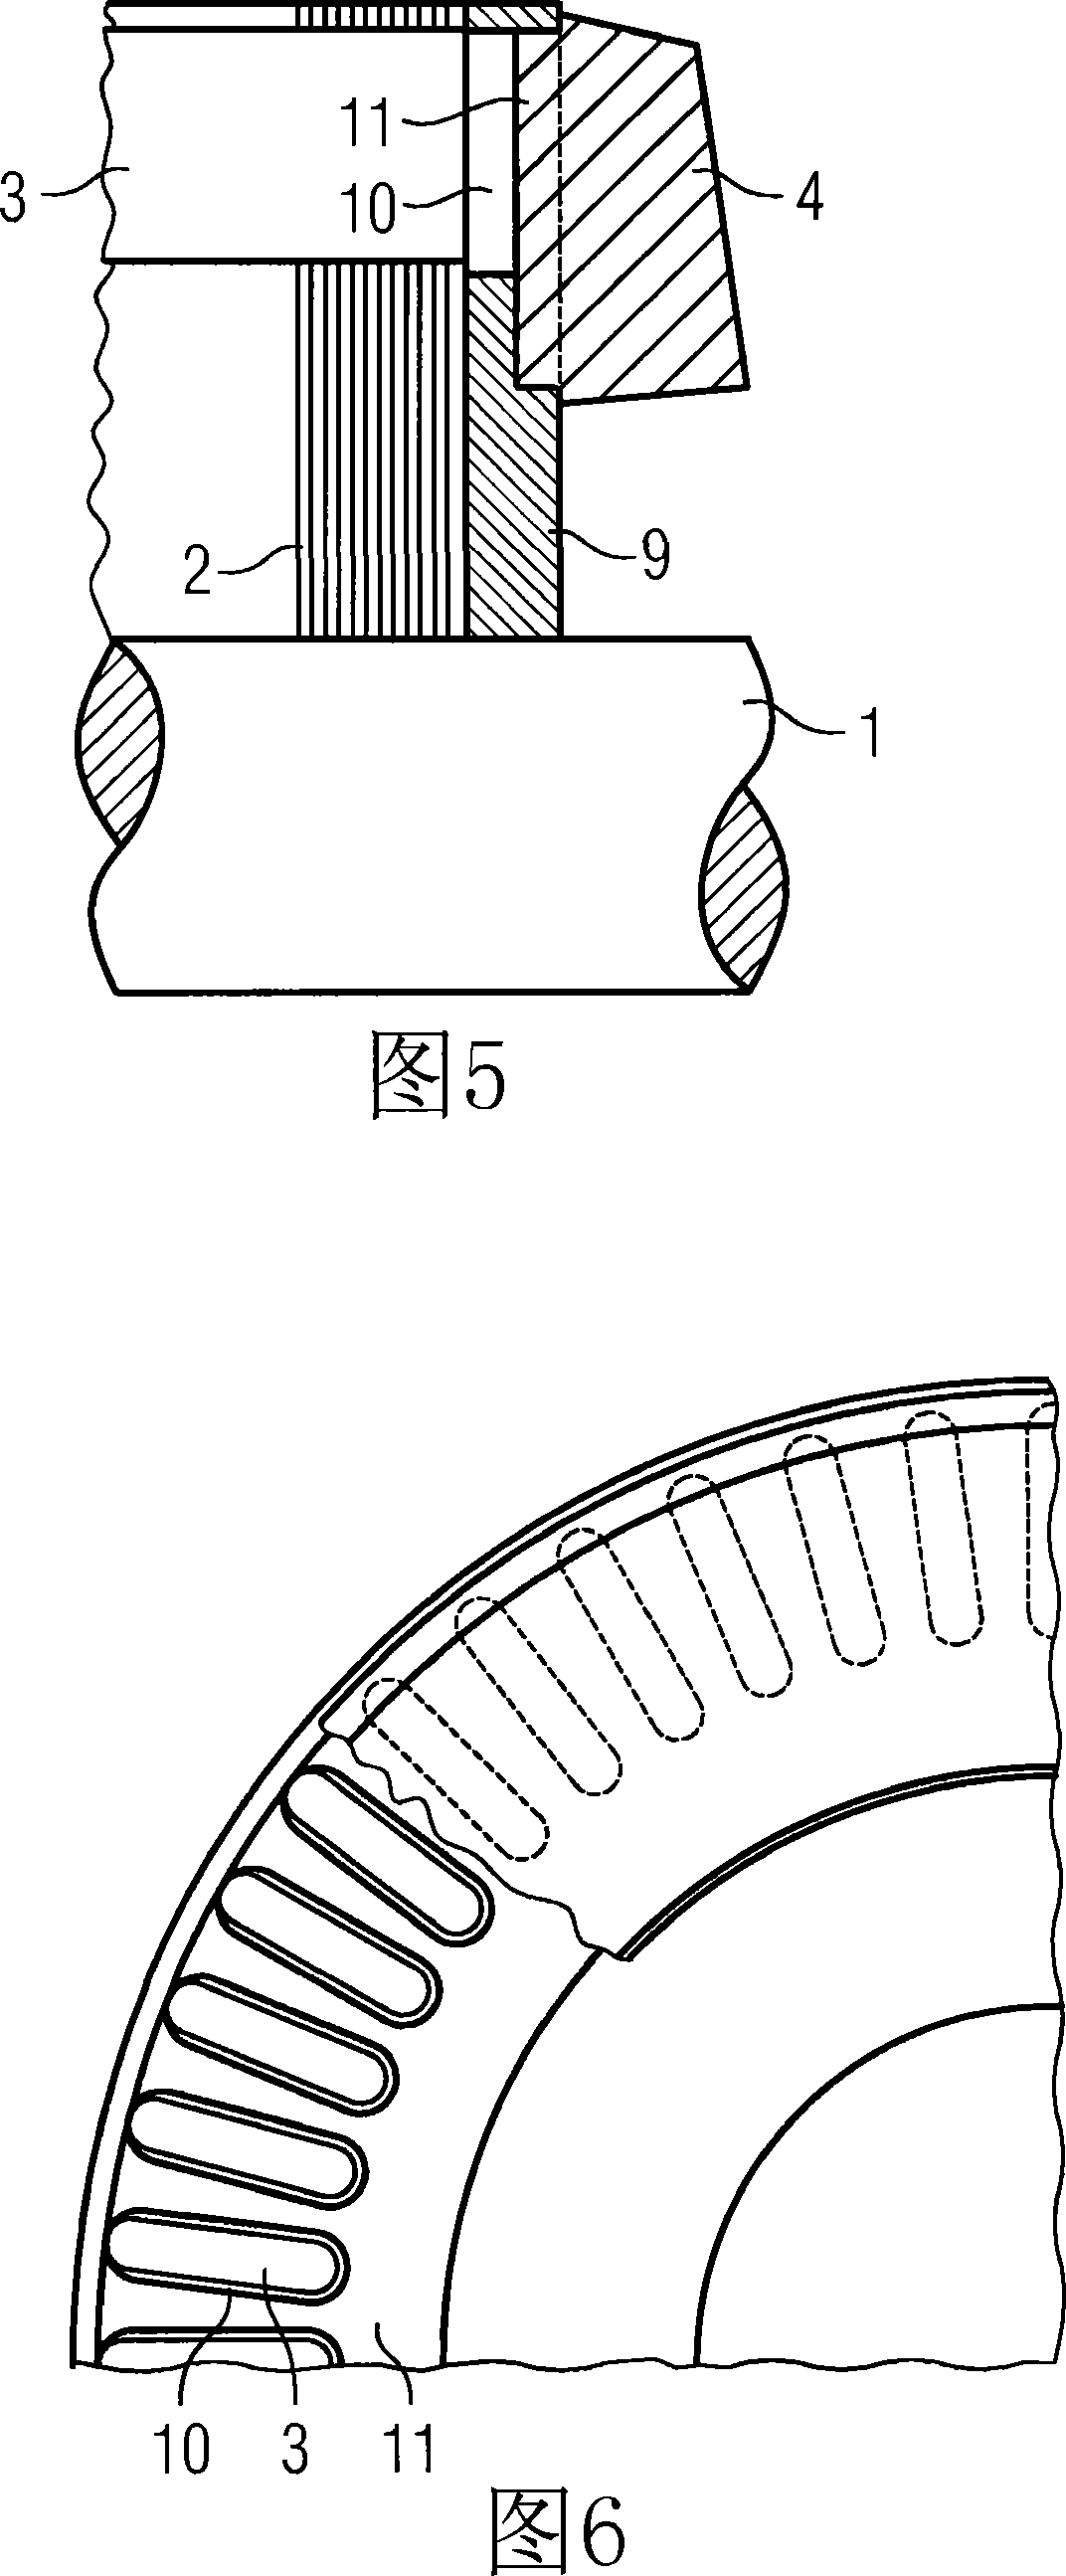 Cage rotor for an asynchronous motor